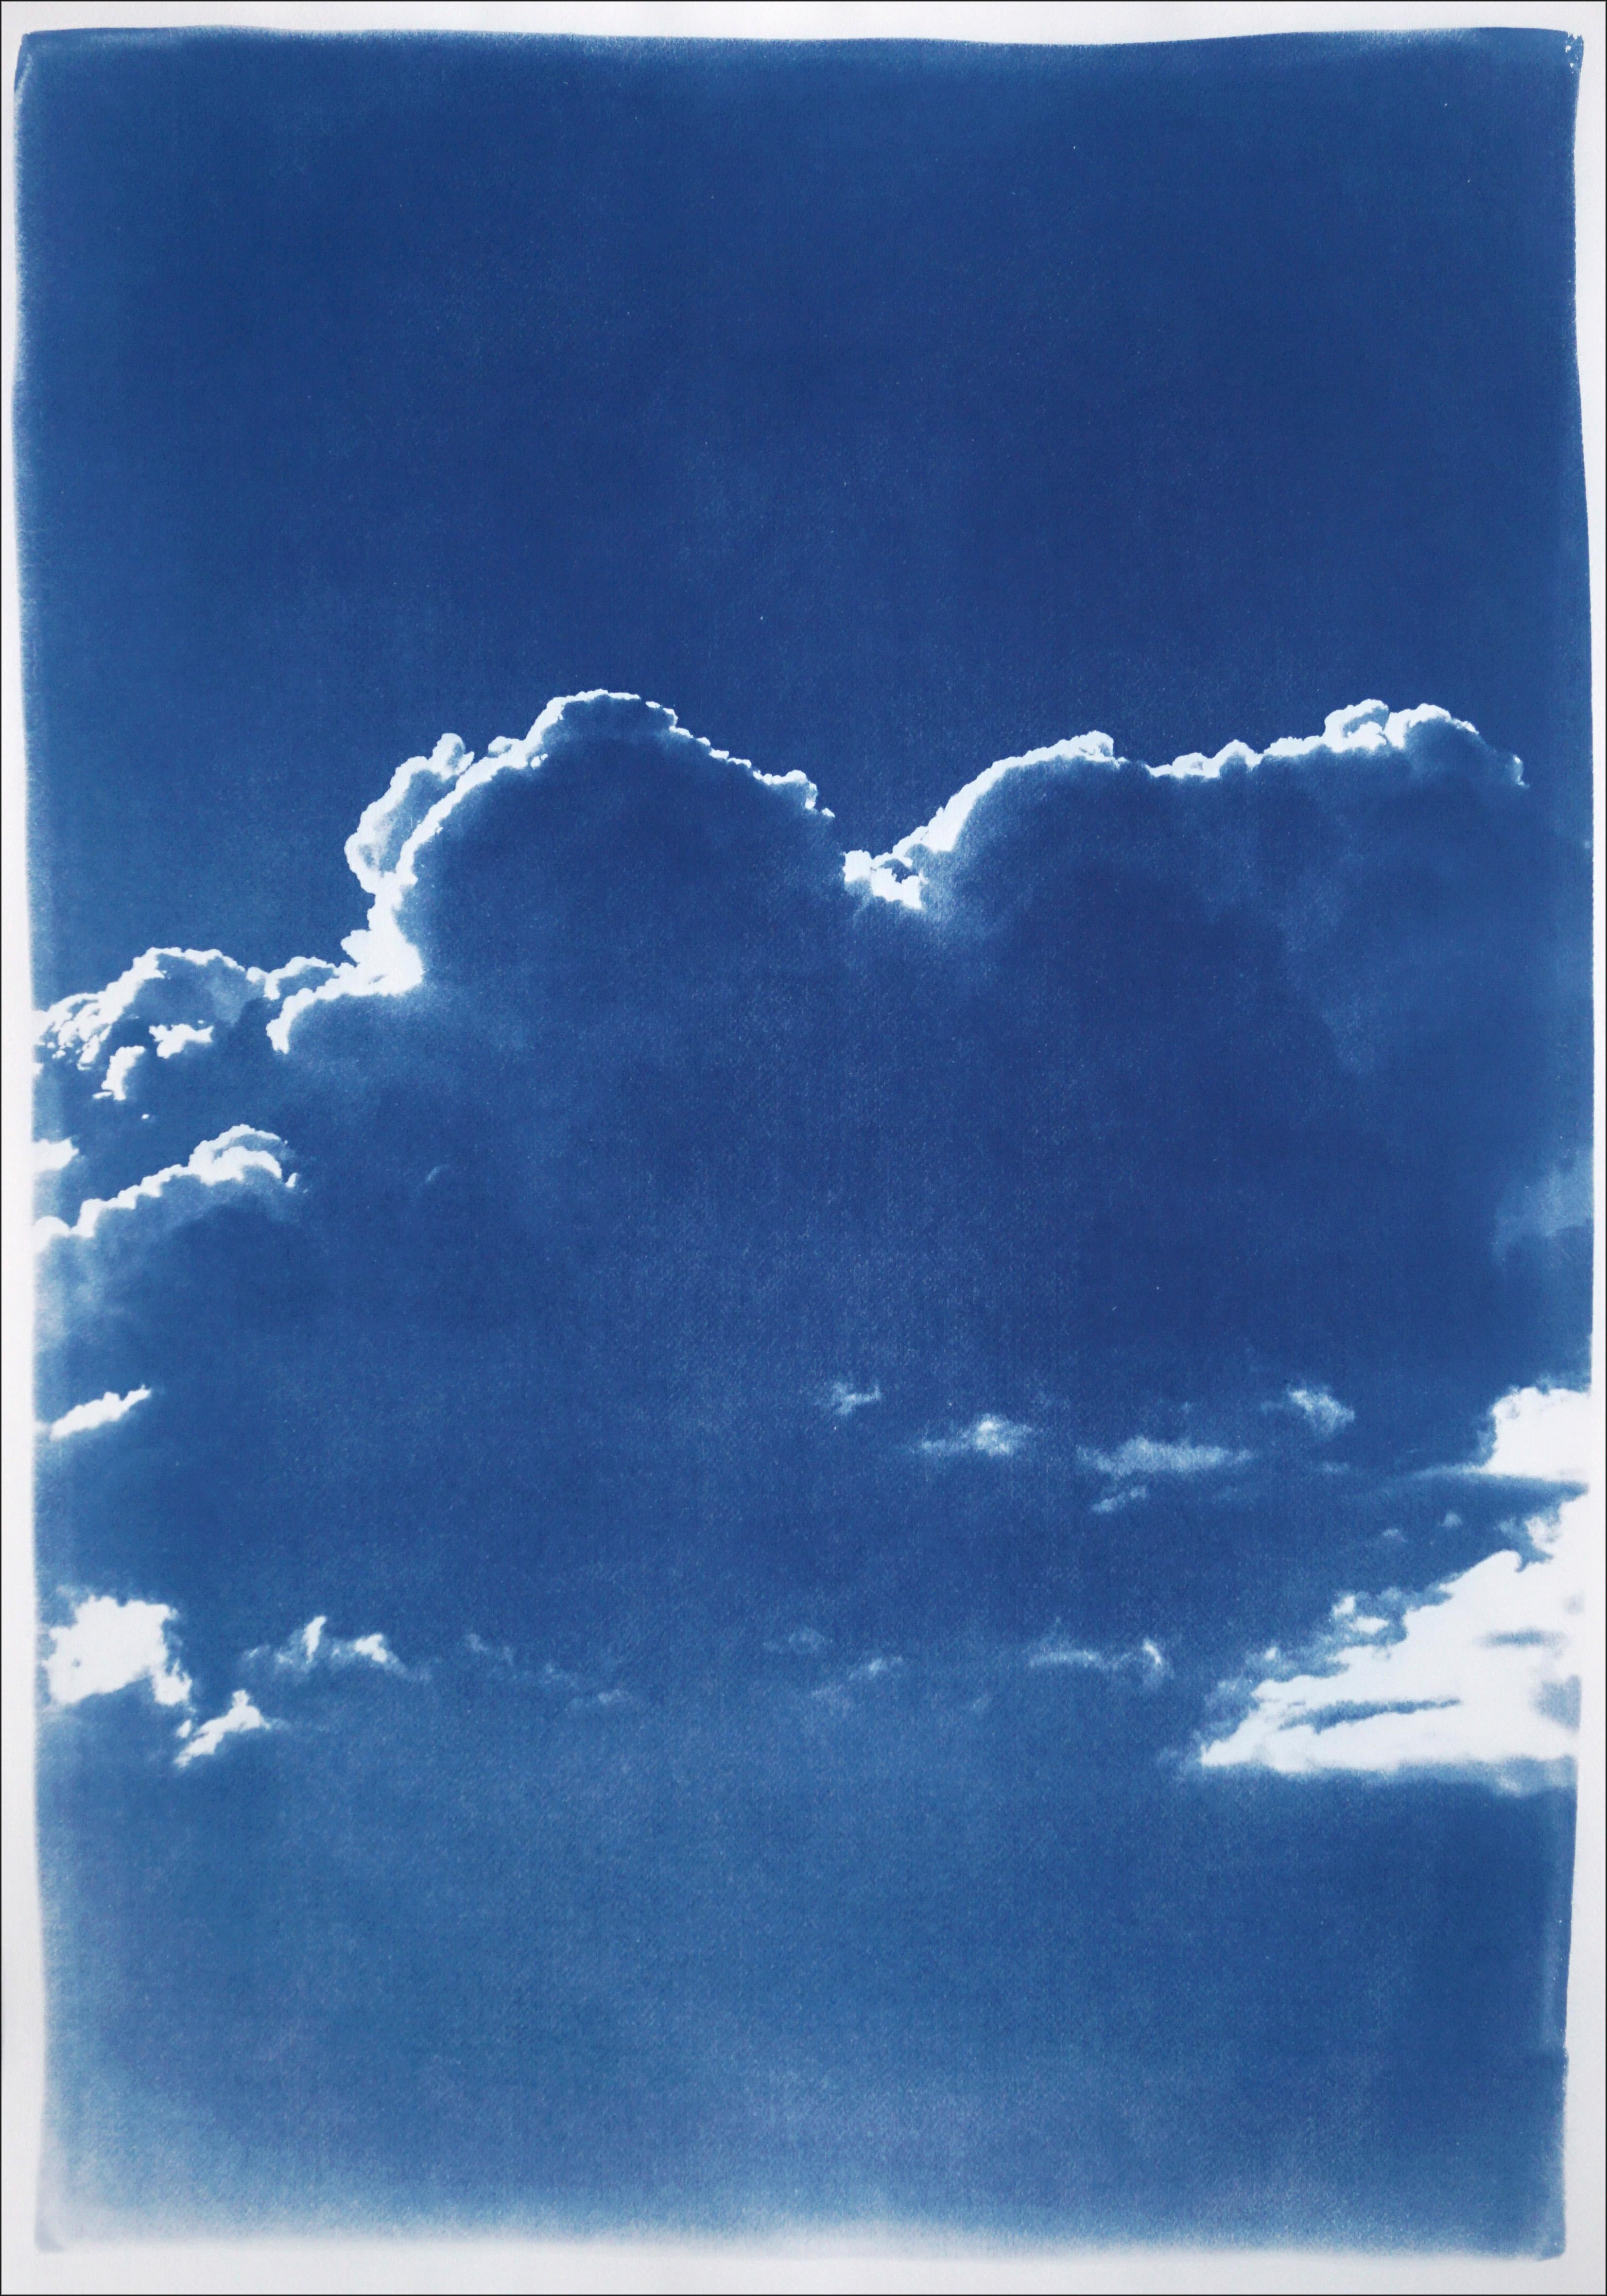 This is an exclusive handprinted limited edition of a cyanotype print. 
This gorgeous triptych portraits a serene evening cloud traveling through the sky. 

Details:
+ Title: Serene Cloudy Sky
+ Year: 2022
+ Edition Size: 100
+ Stamped and